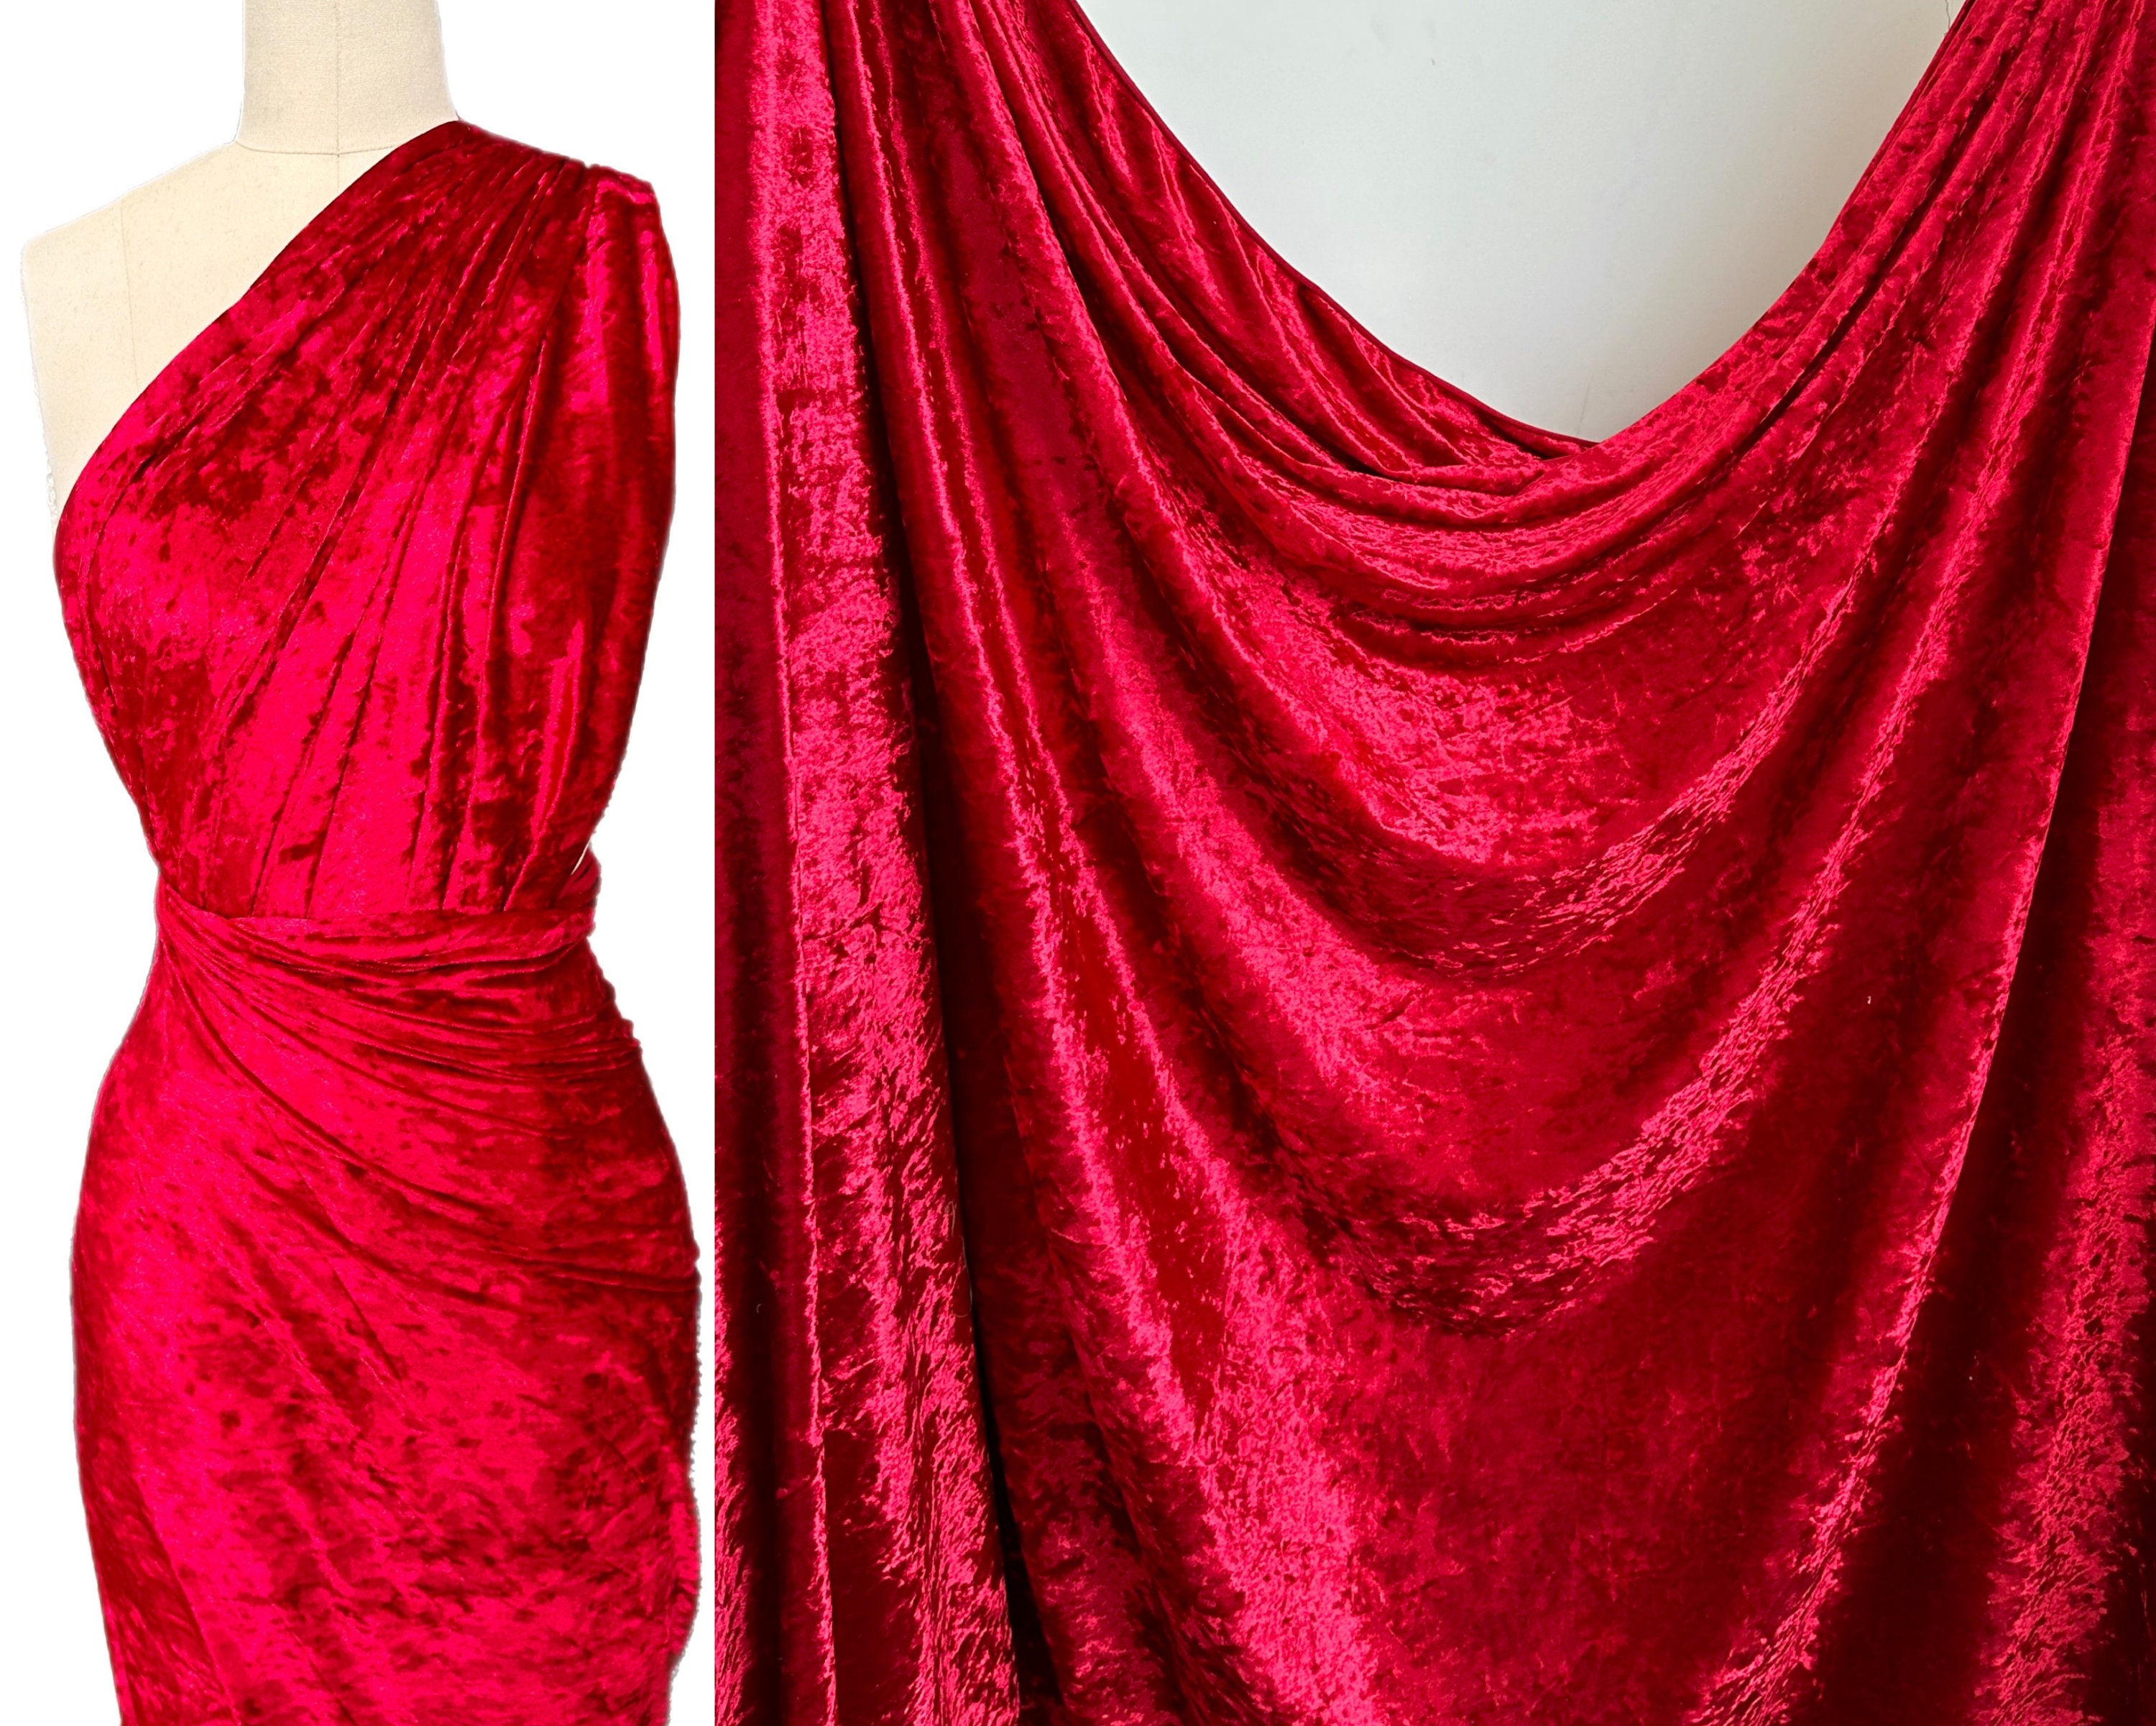 PREMIUM QUALITY Red Crushed Velvet Fabric by the Yard, Red Stretch